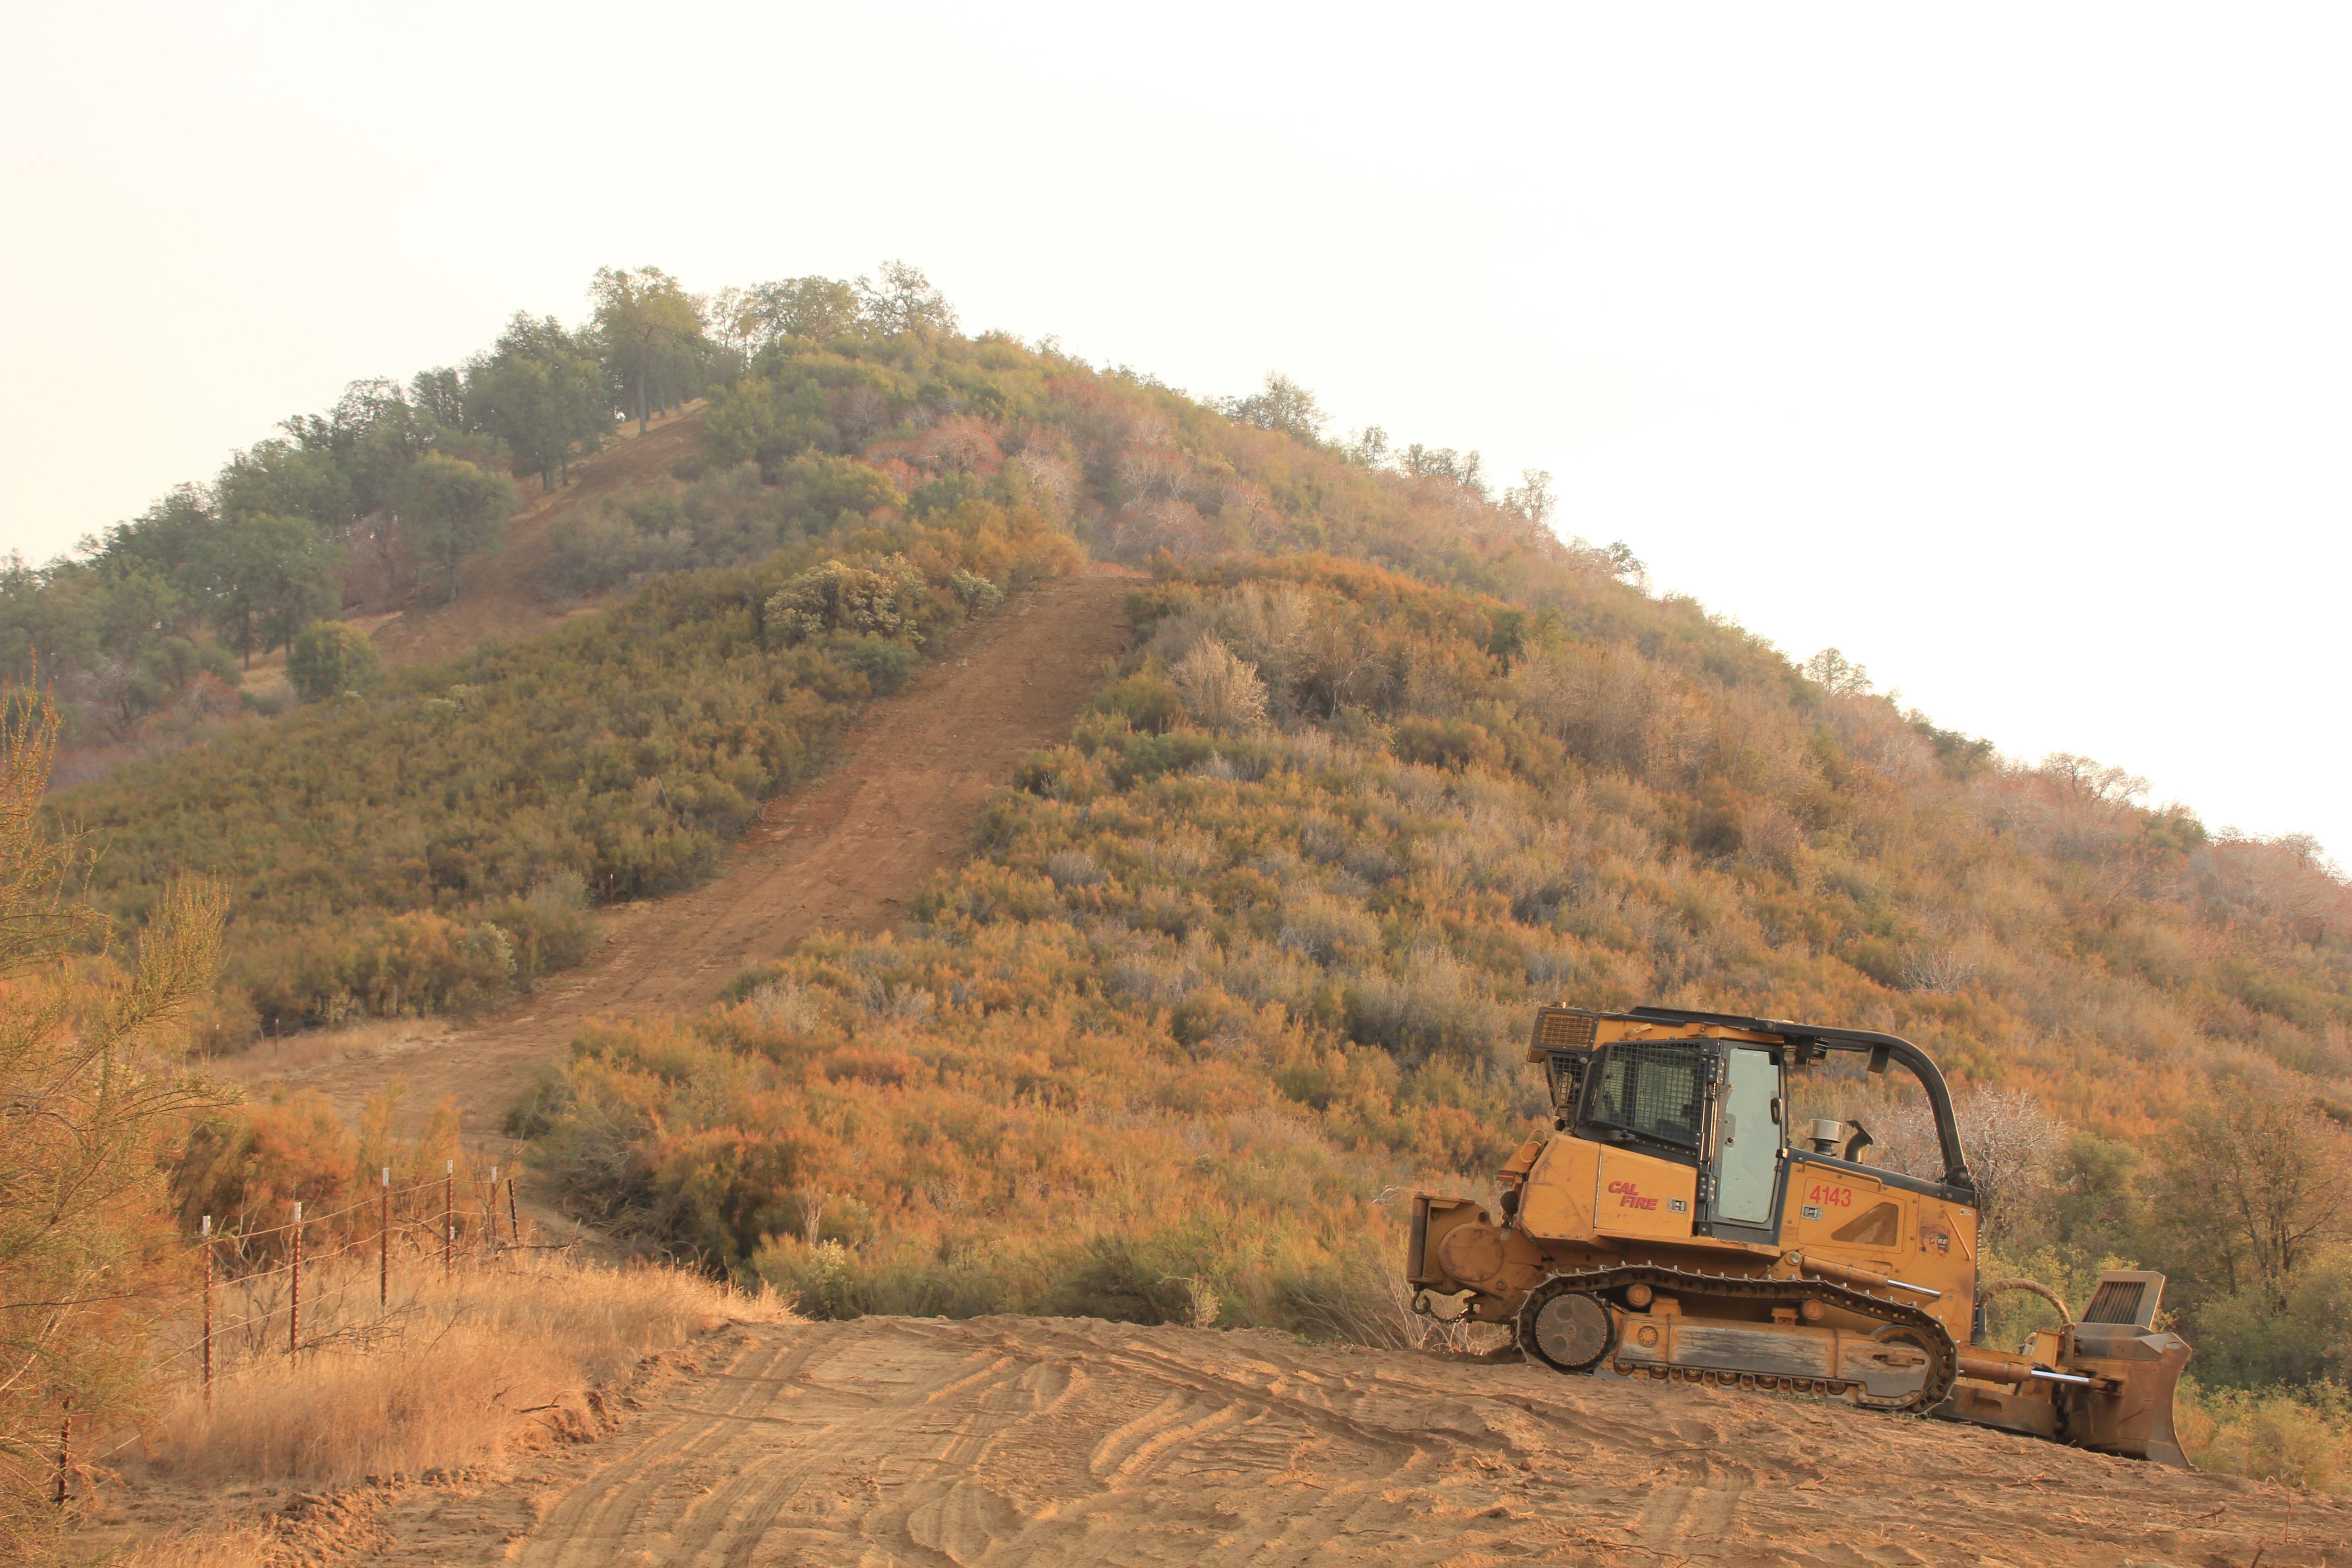 A pushed out bulldozed area with 4 dozers parked